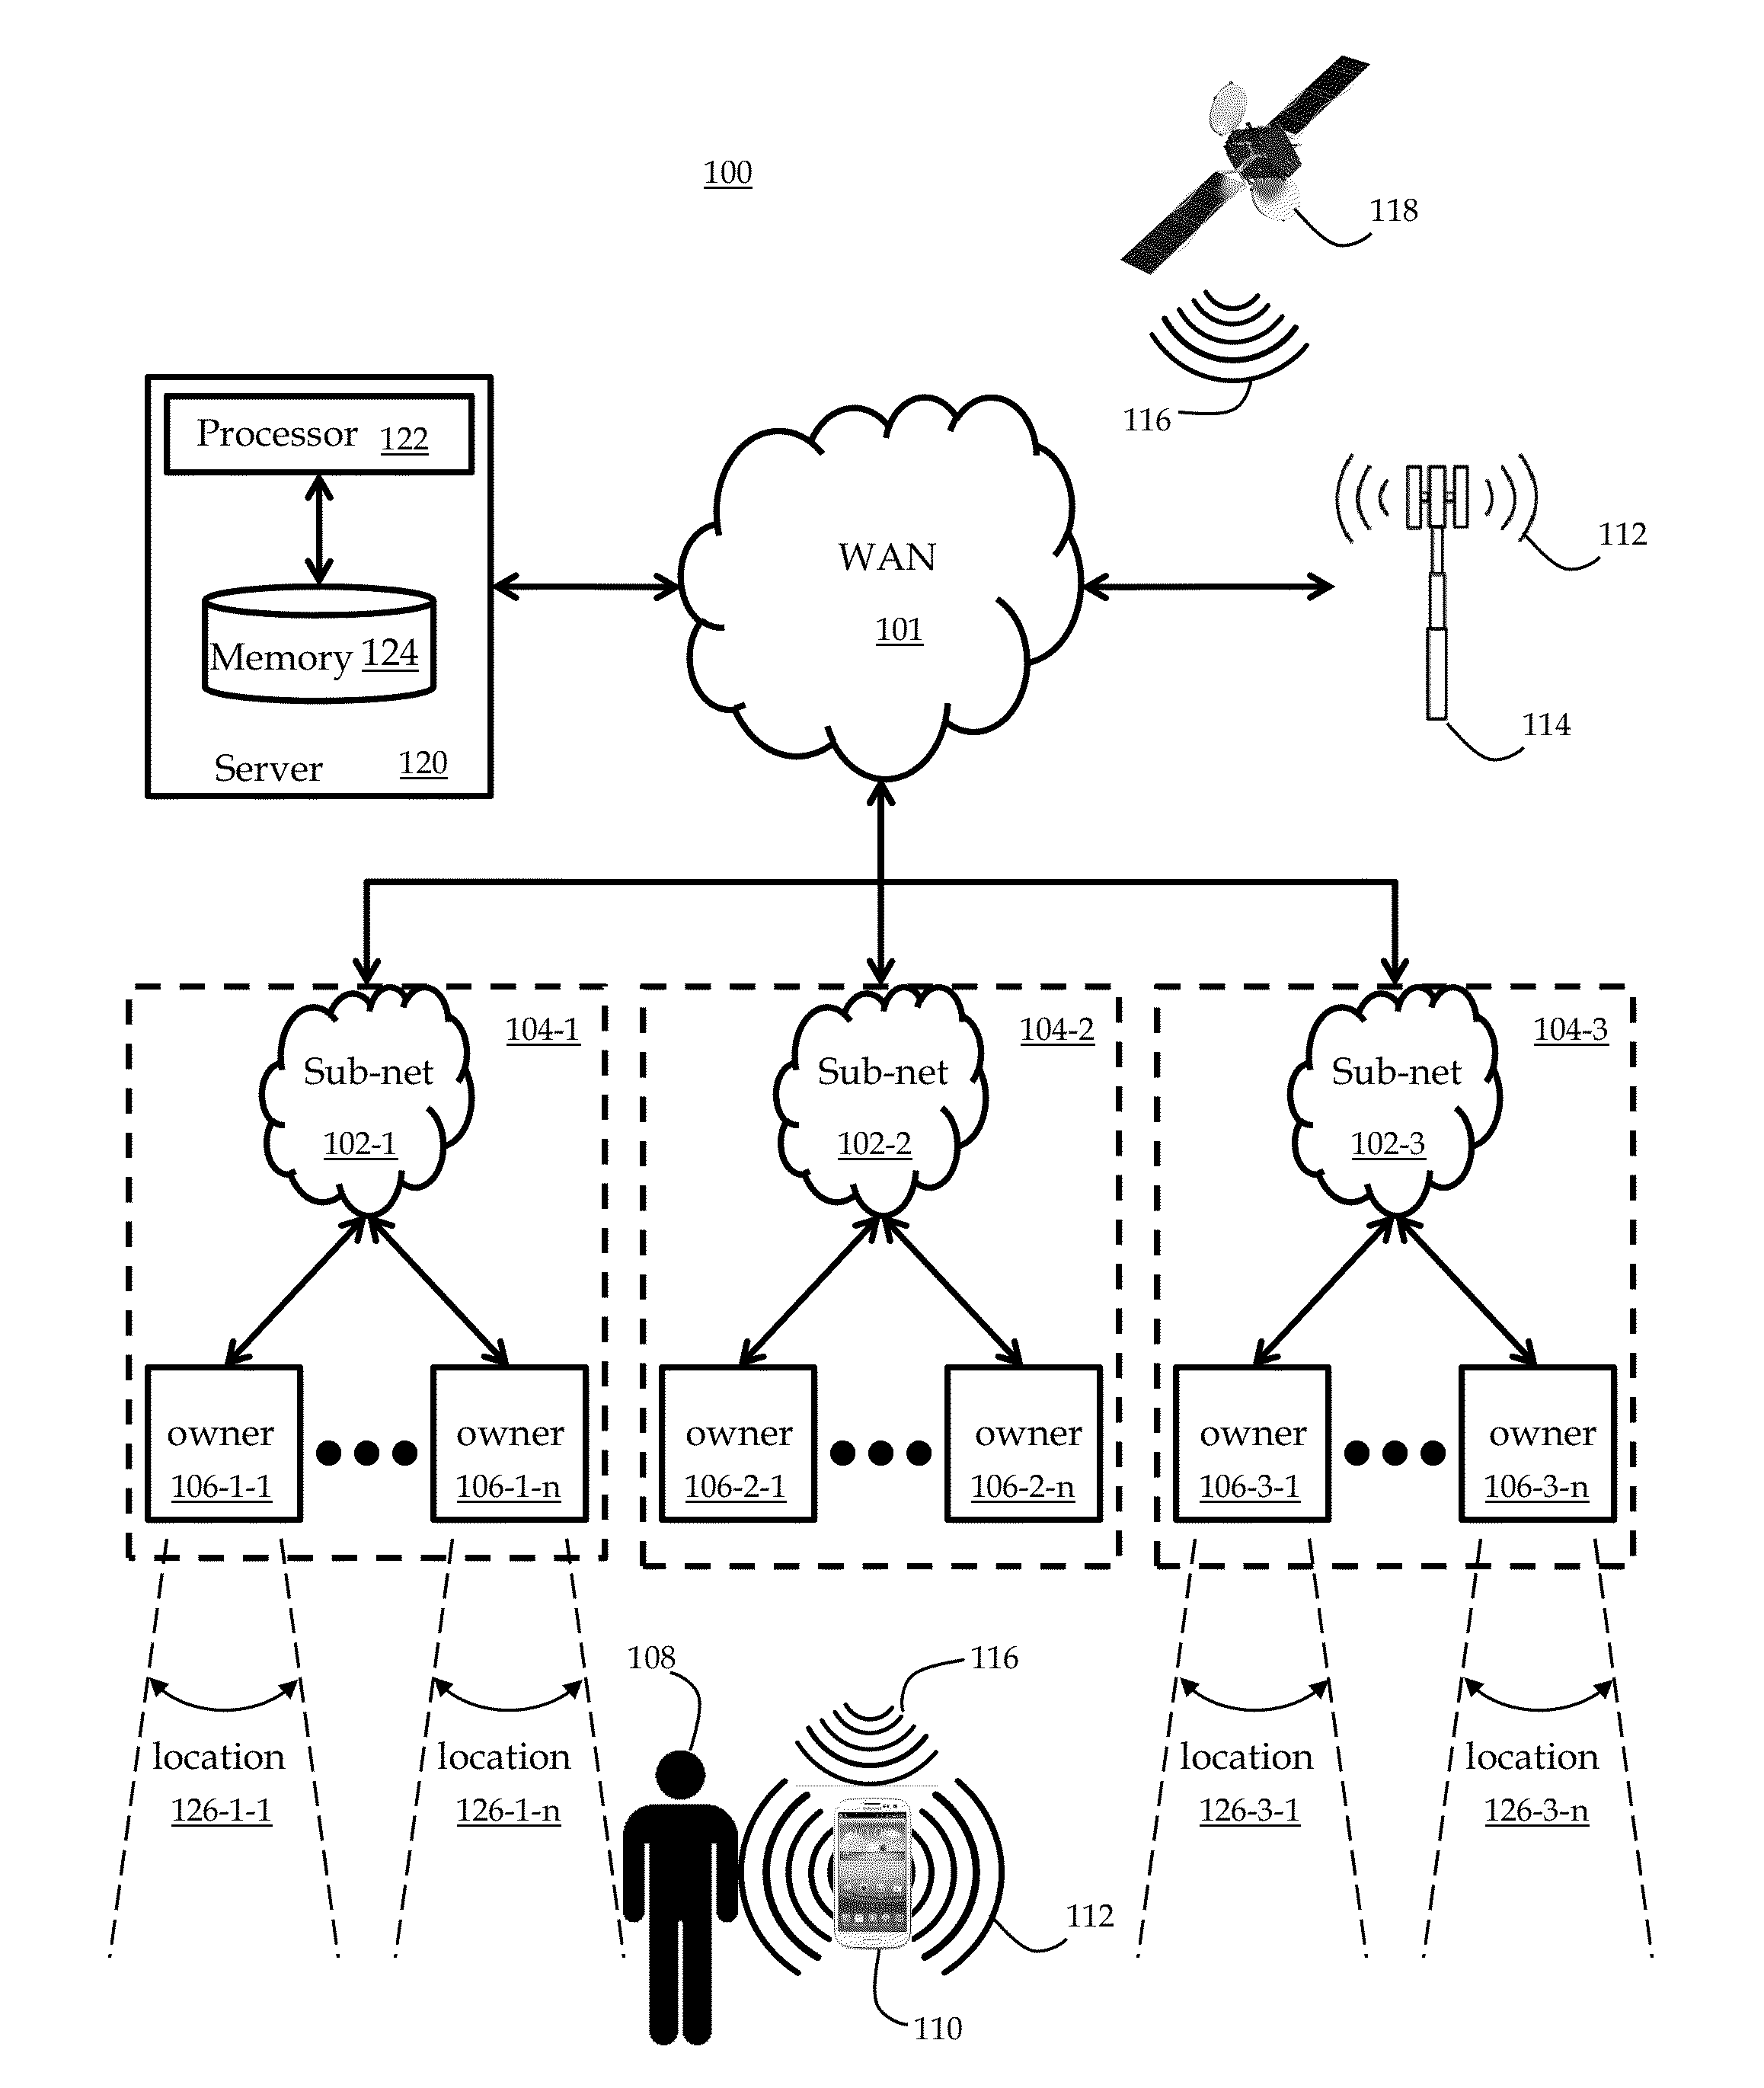 System and method for web presence for one or more geographical locations